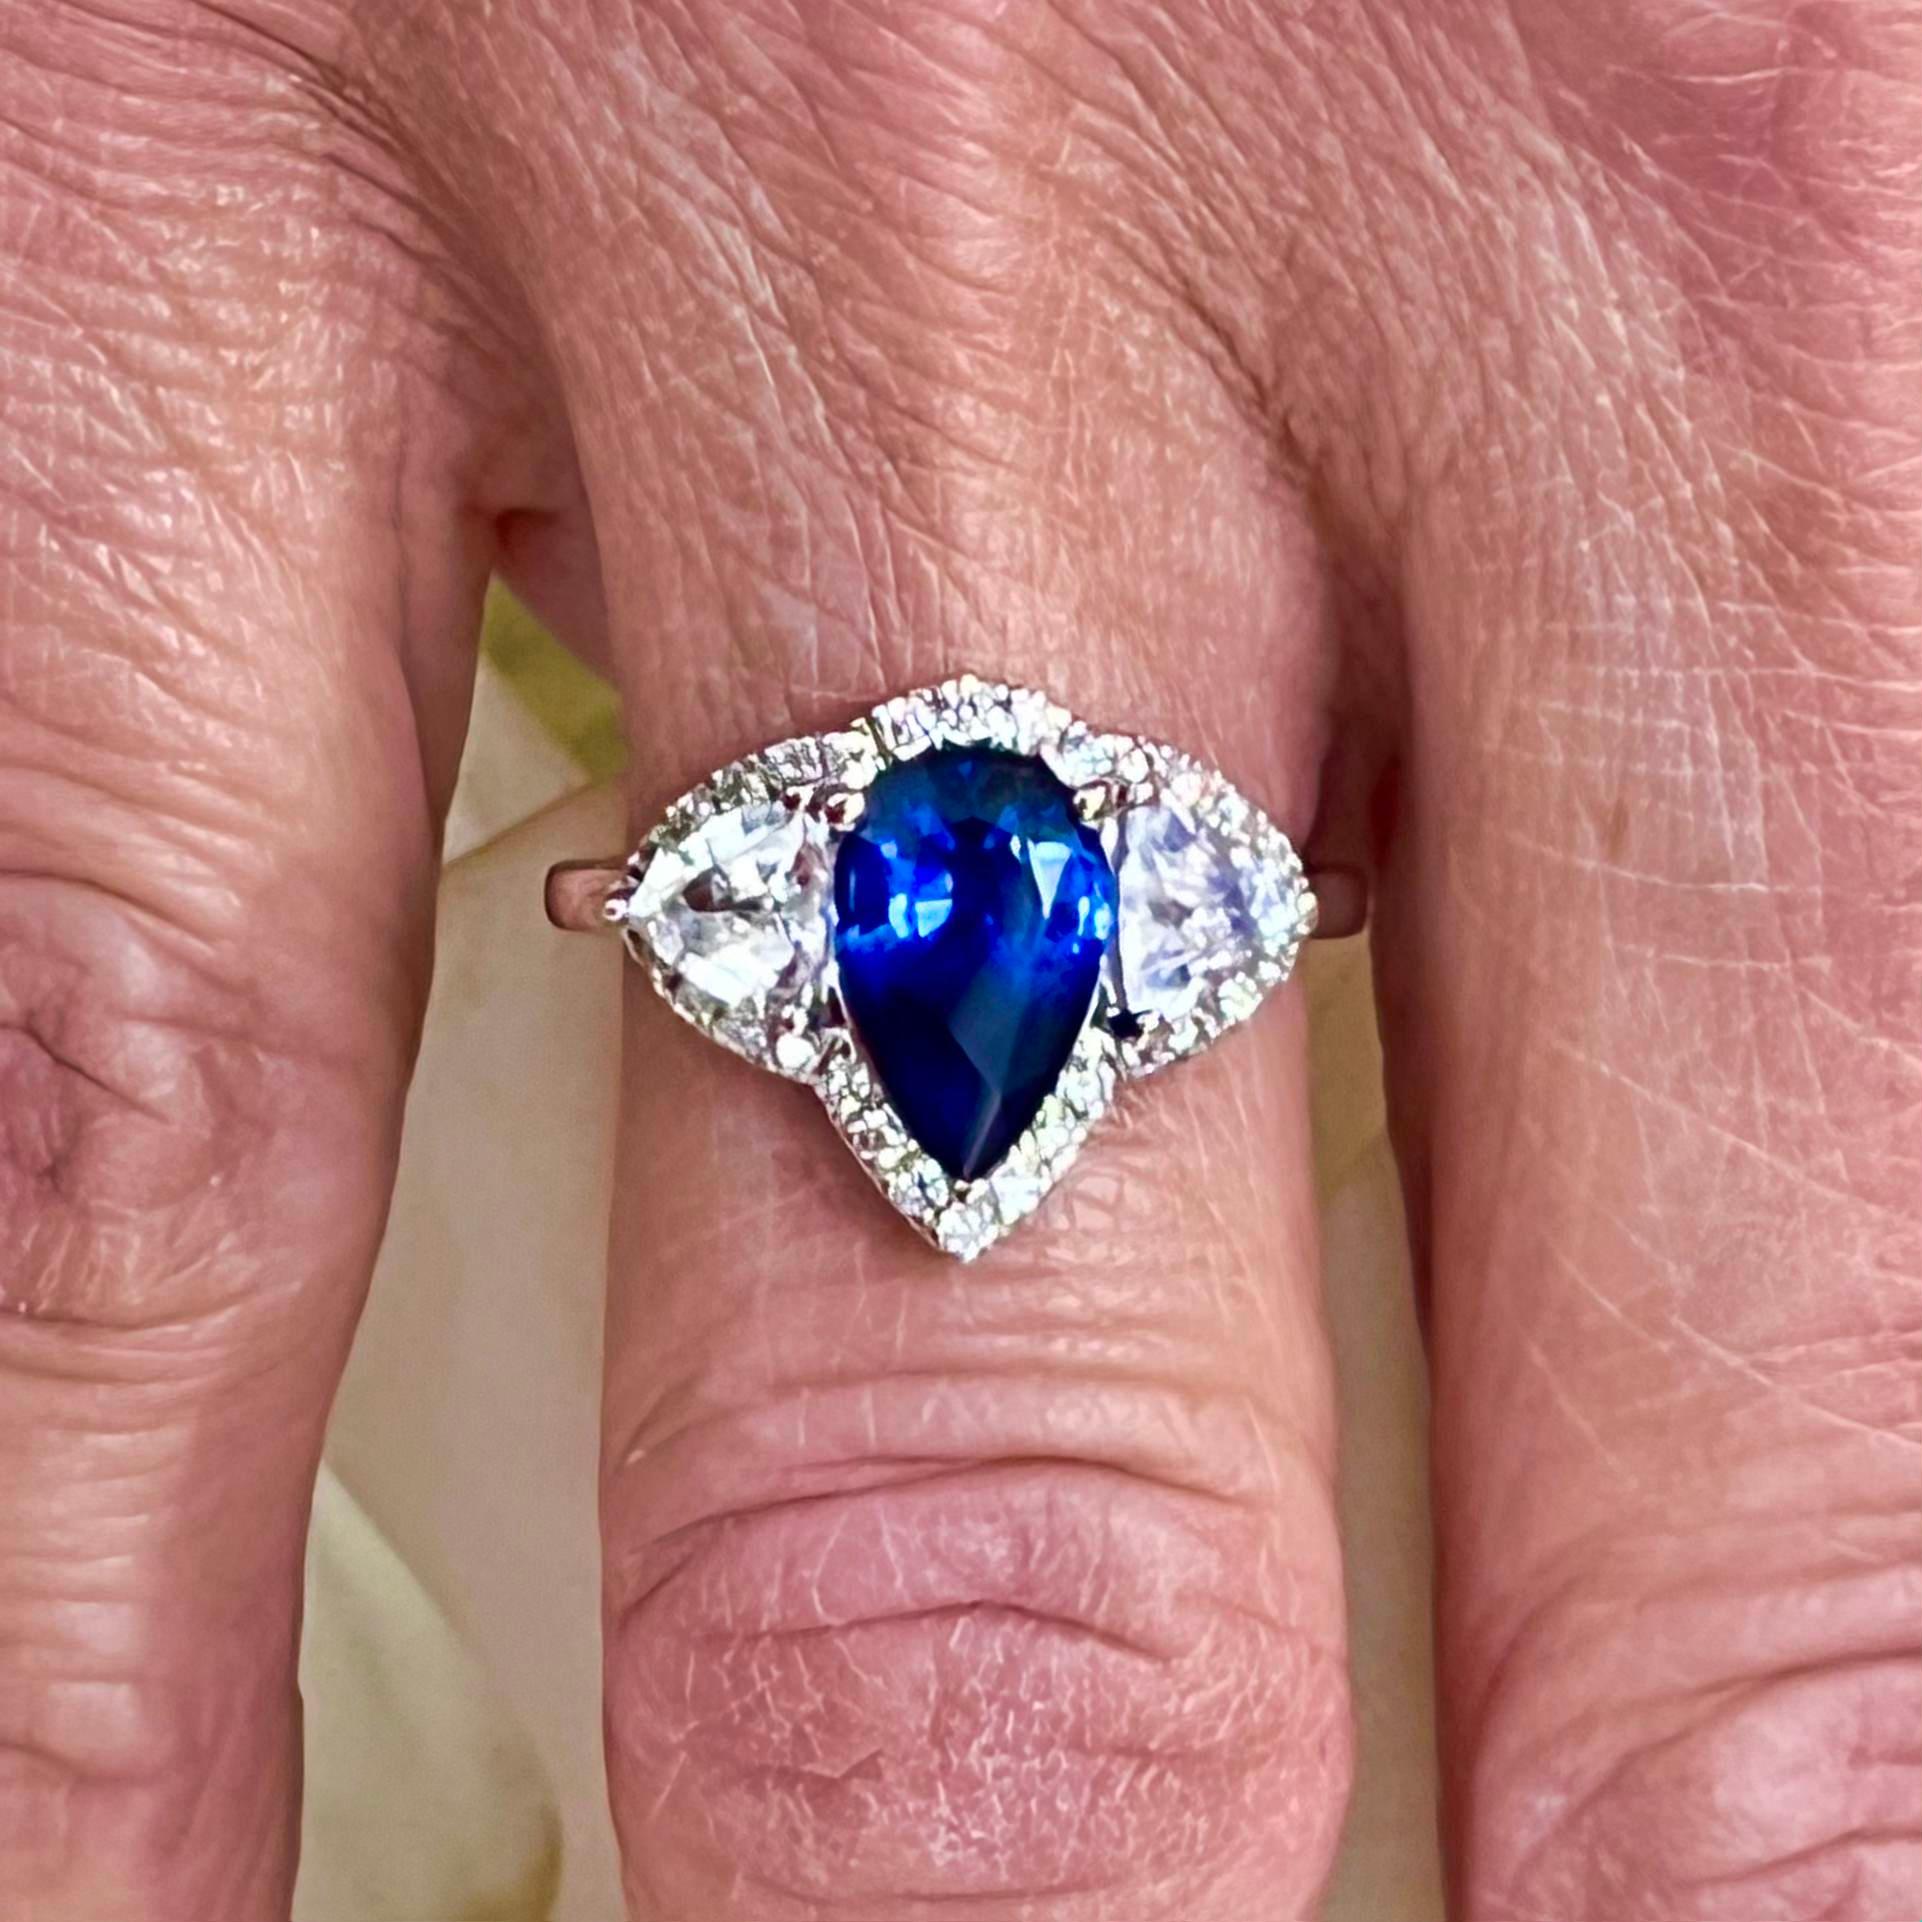 Natural Sapphire Diamond Ring Size 6.5 14k W Gold 2.78 TCW Certified $5,975 219221

This is a Unique Custom Made Glamorous Piece of Jewelry!

Nothing says, “I Love you” more than Diamonds and Pearls!

This Sapphire ring has been Certified,